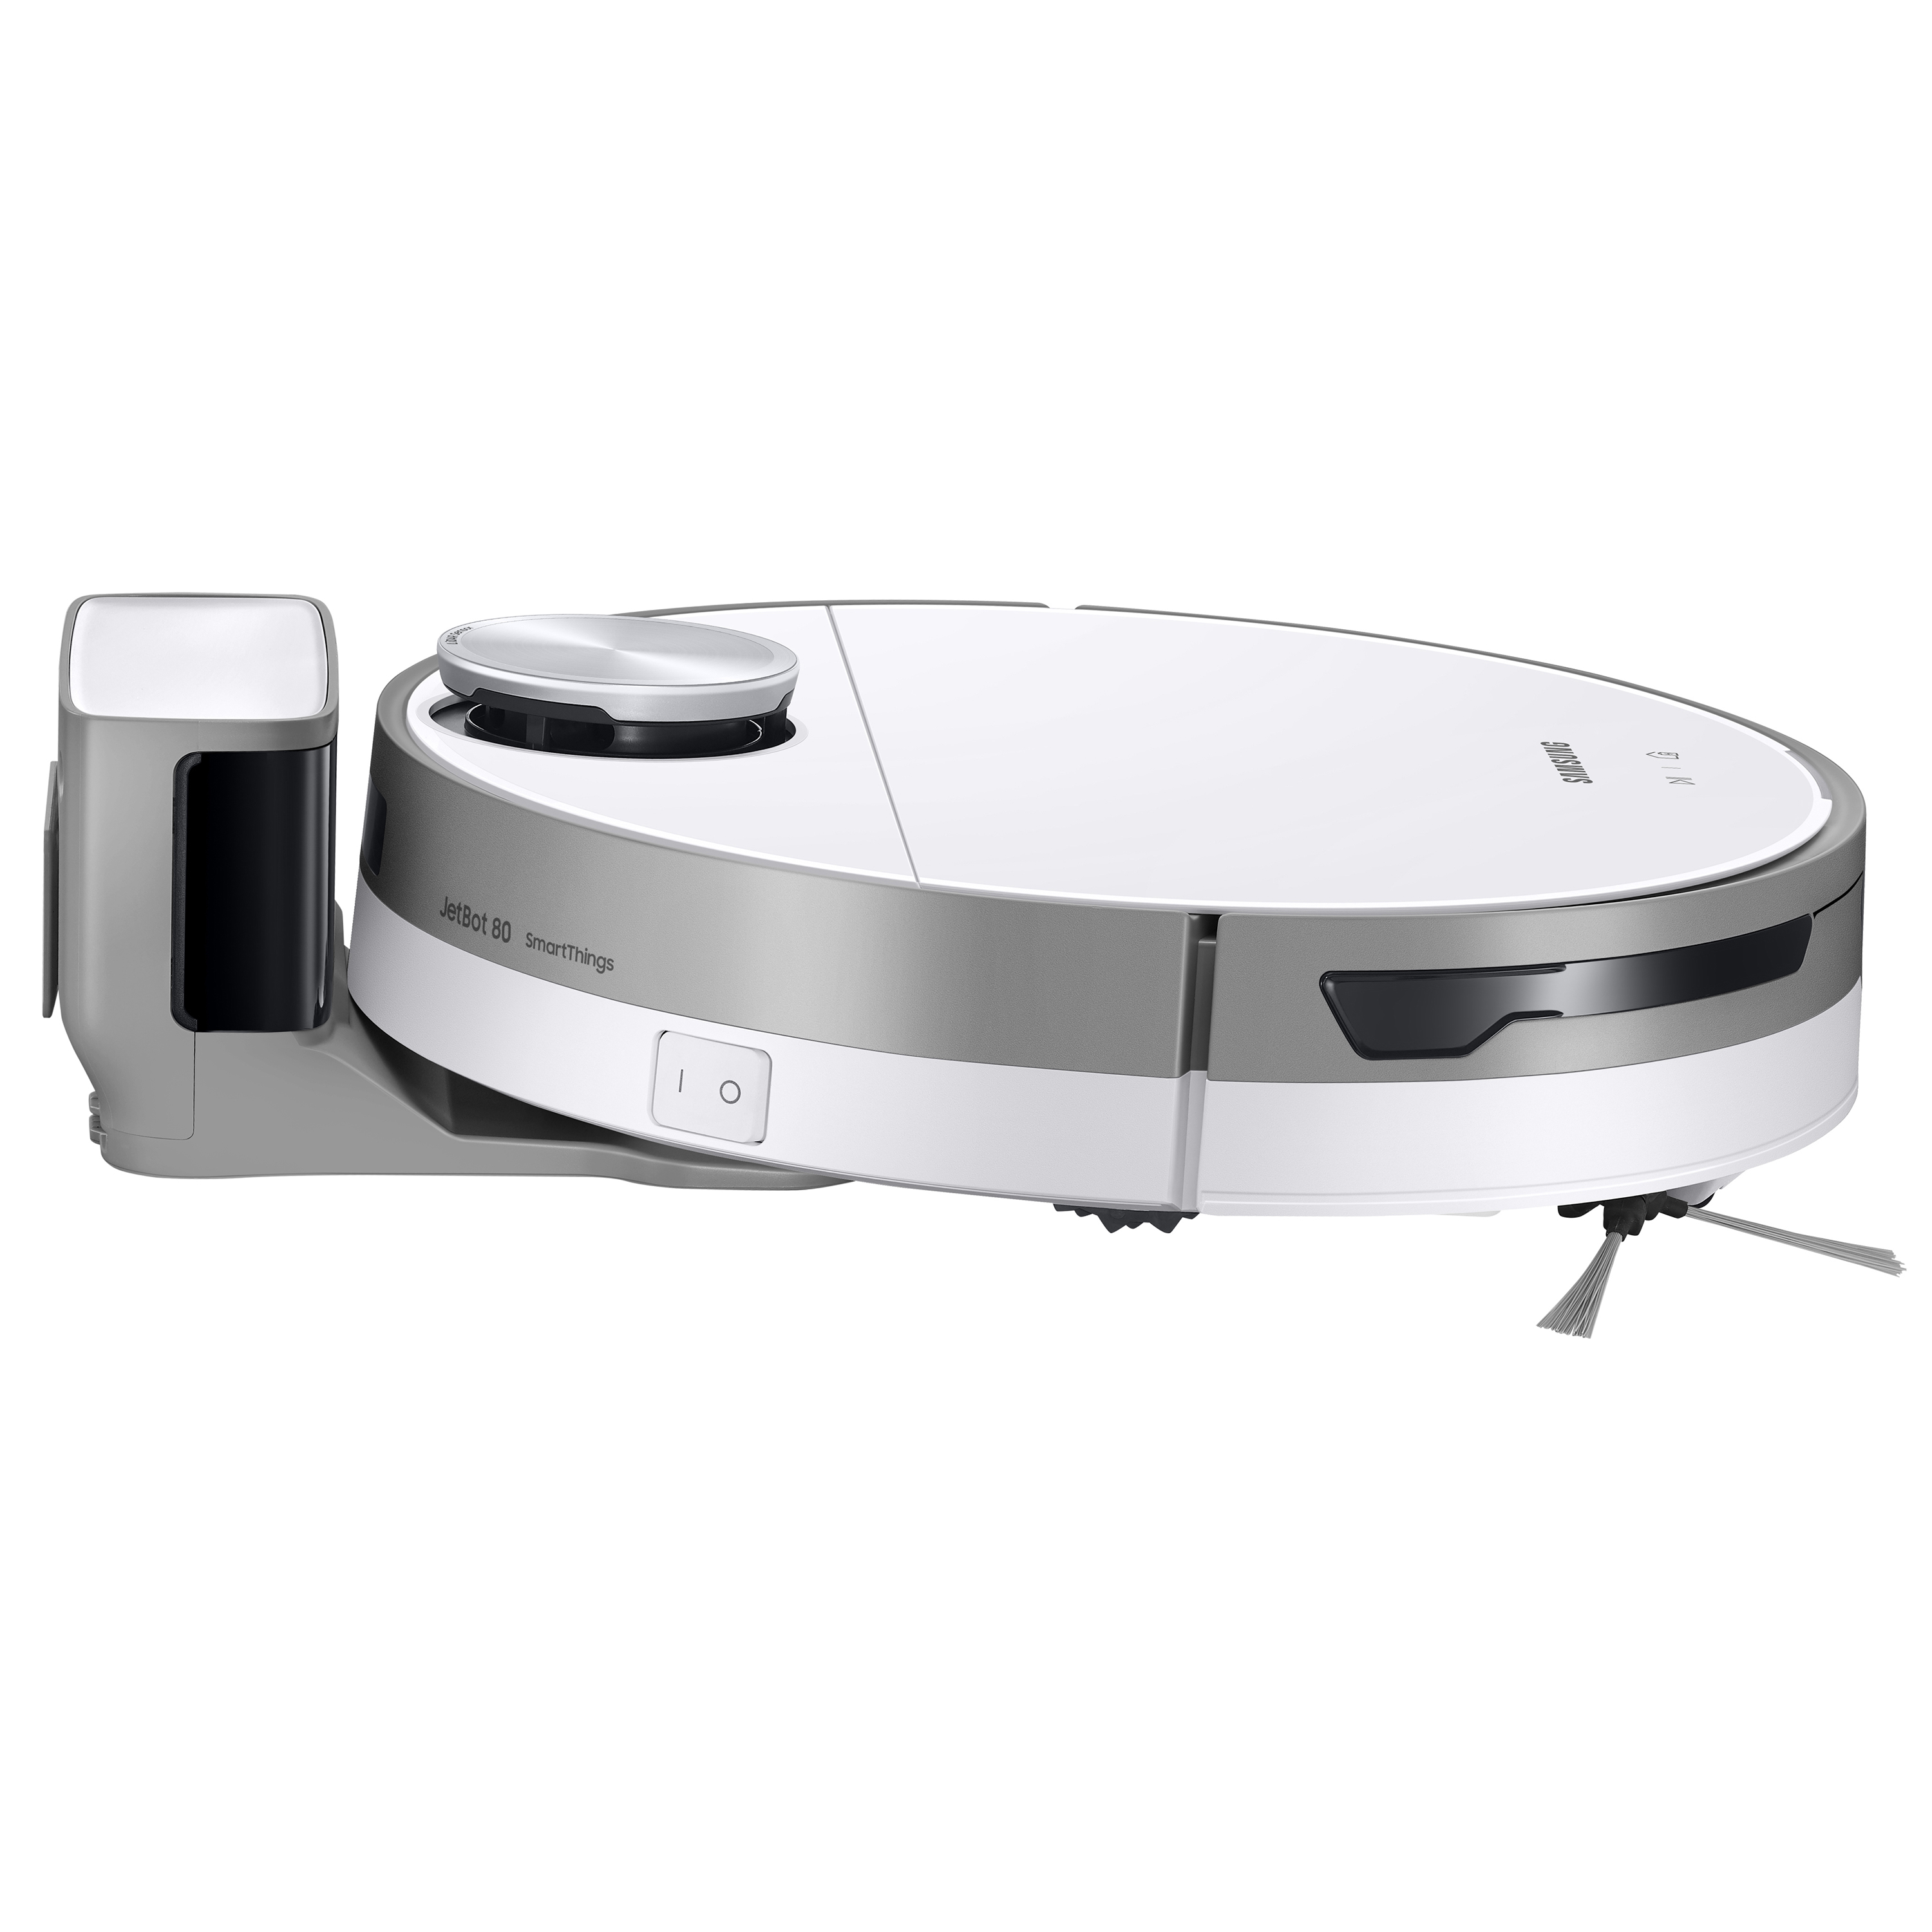 SAMSUNG Jet Bot Robot Vacuum with Intelligent Power Control - image 5 of 8